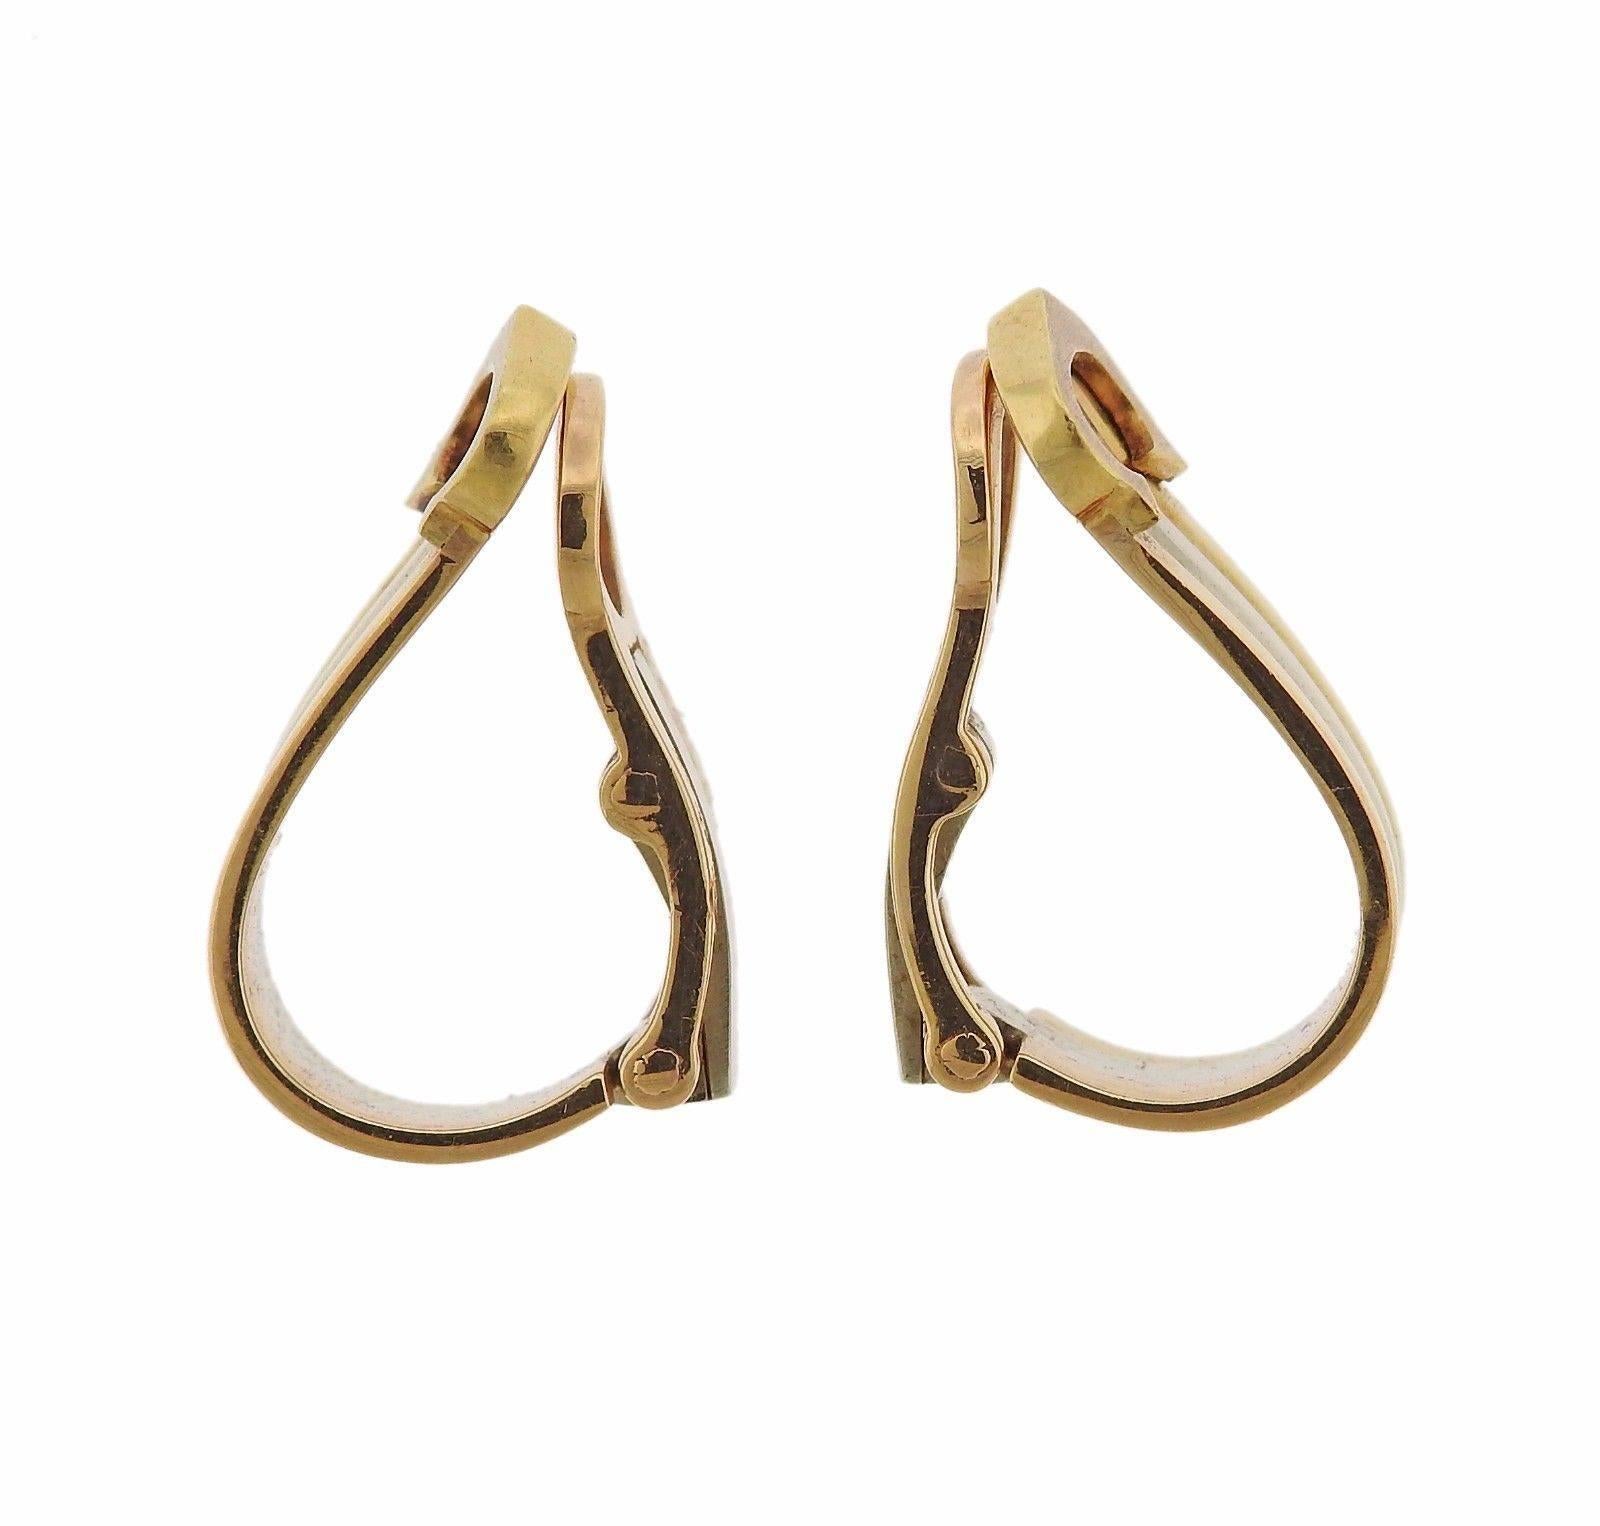 A pair of 18k yellow, white and rose gold earrings by Cartier.  The earrings measure 16mm x 7mm and weigh 5.4 grams.  Marked: Cartier, 750, 760920.